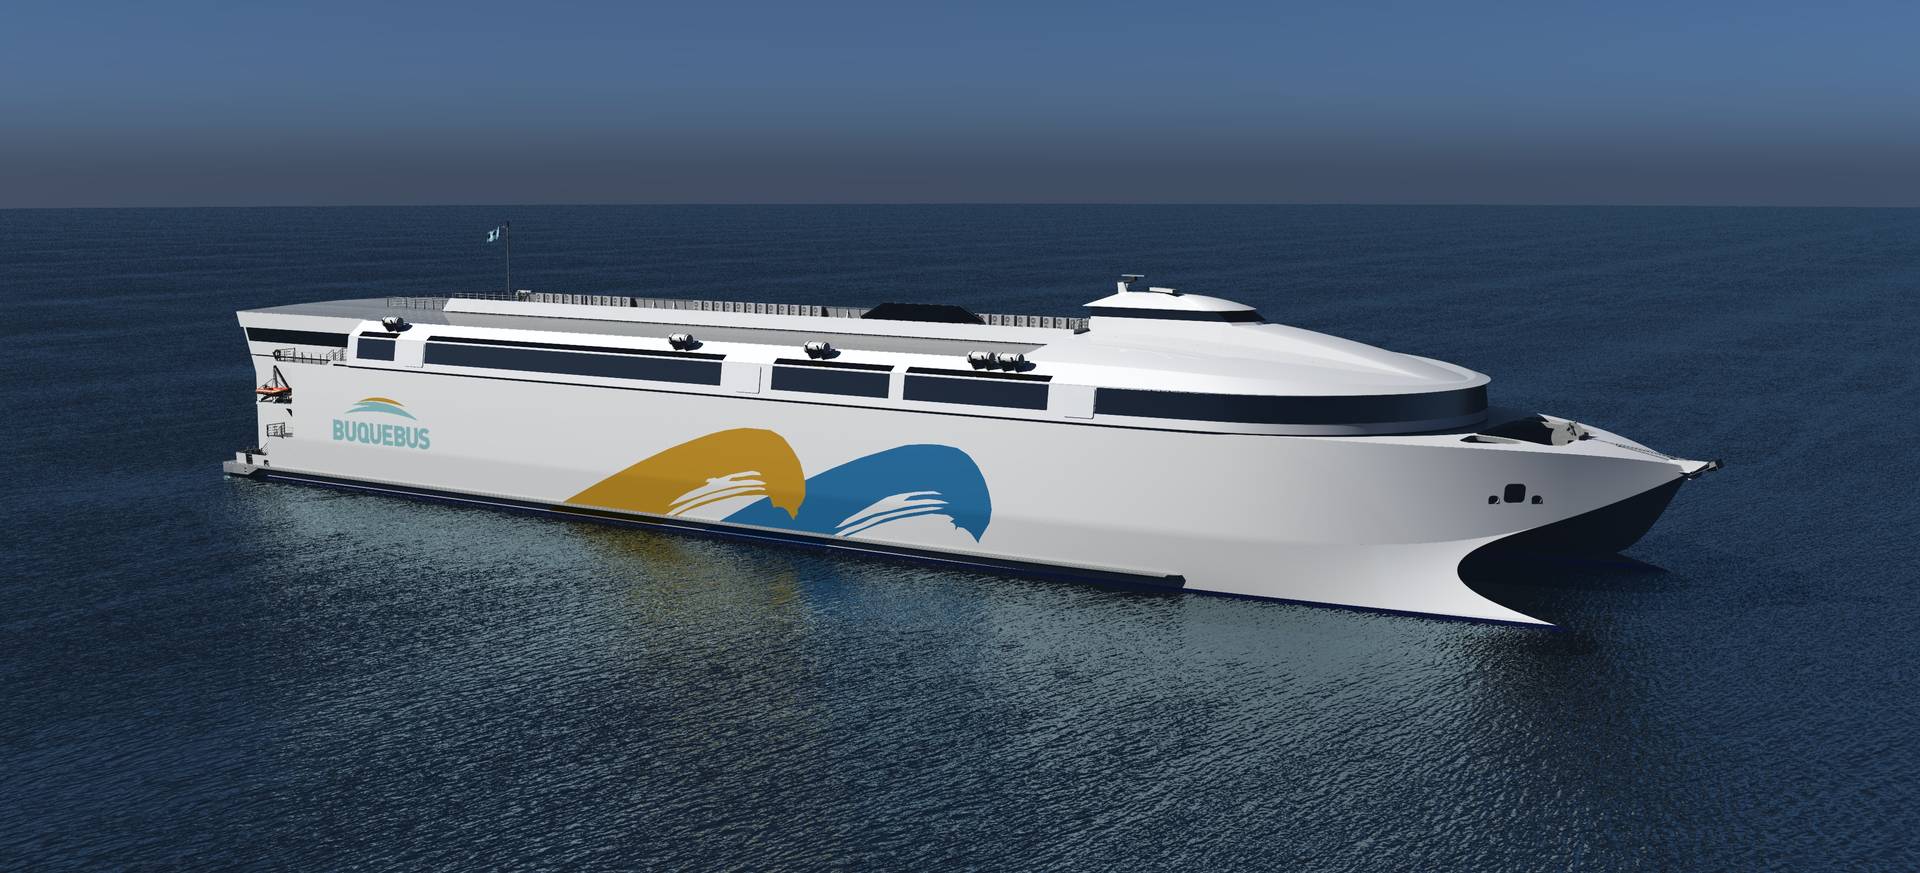 130 meter long LNG ferry will be electric instead